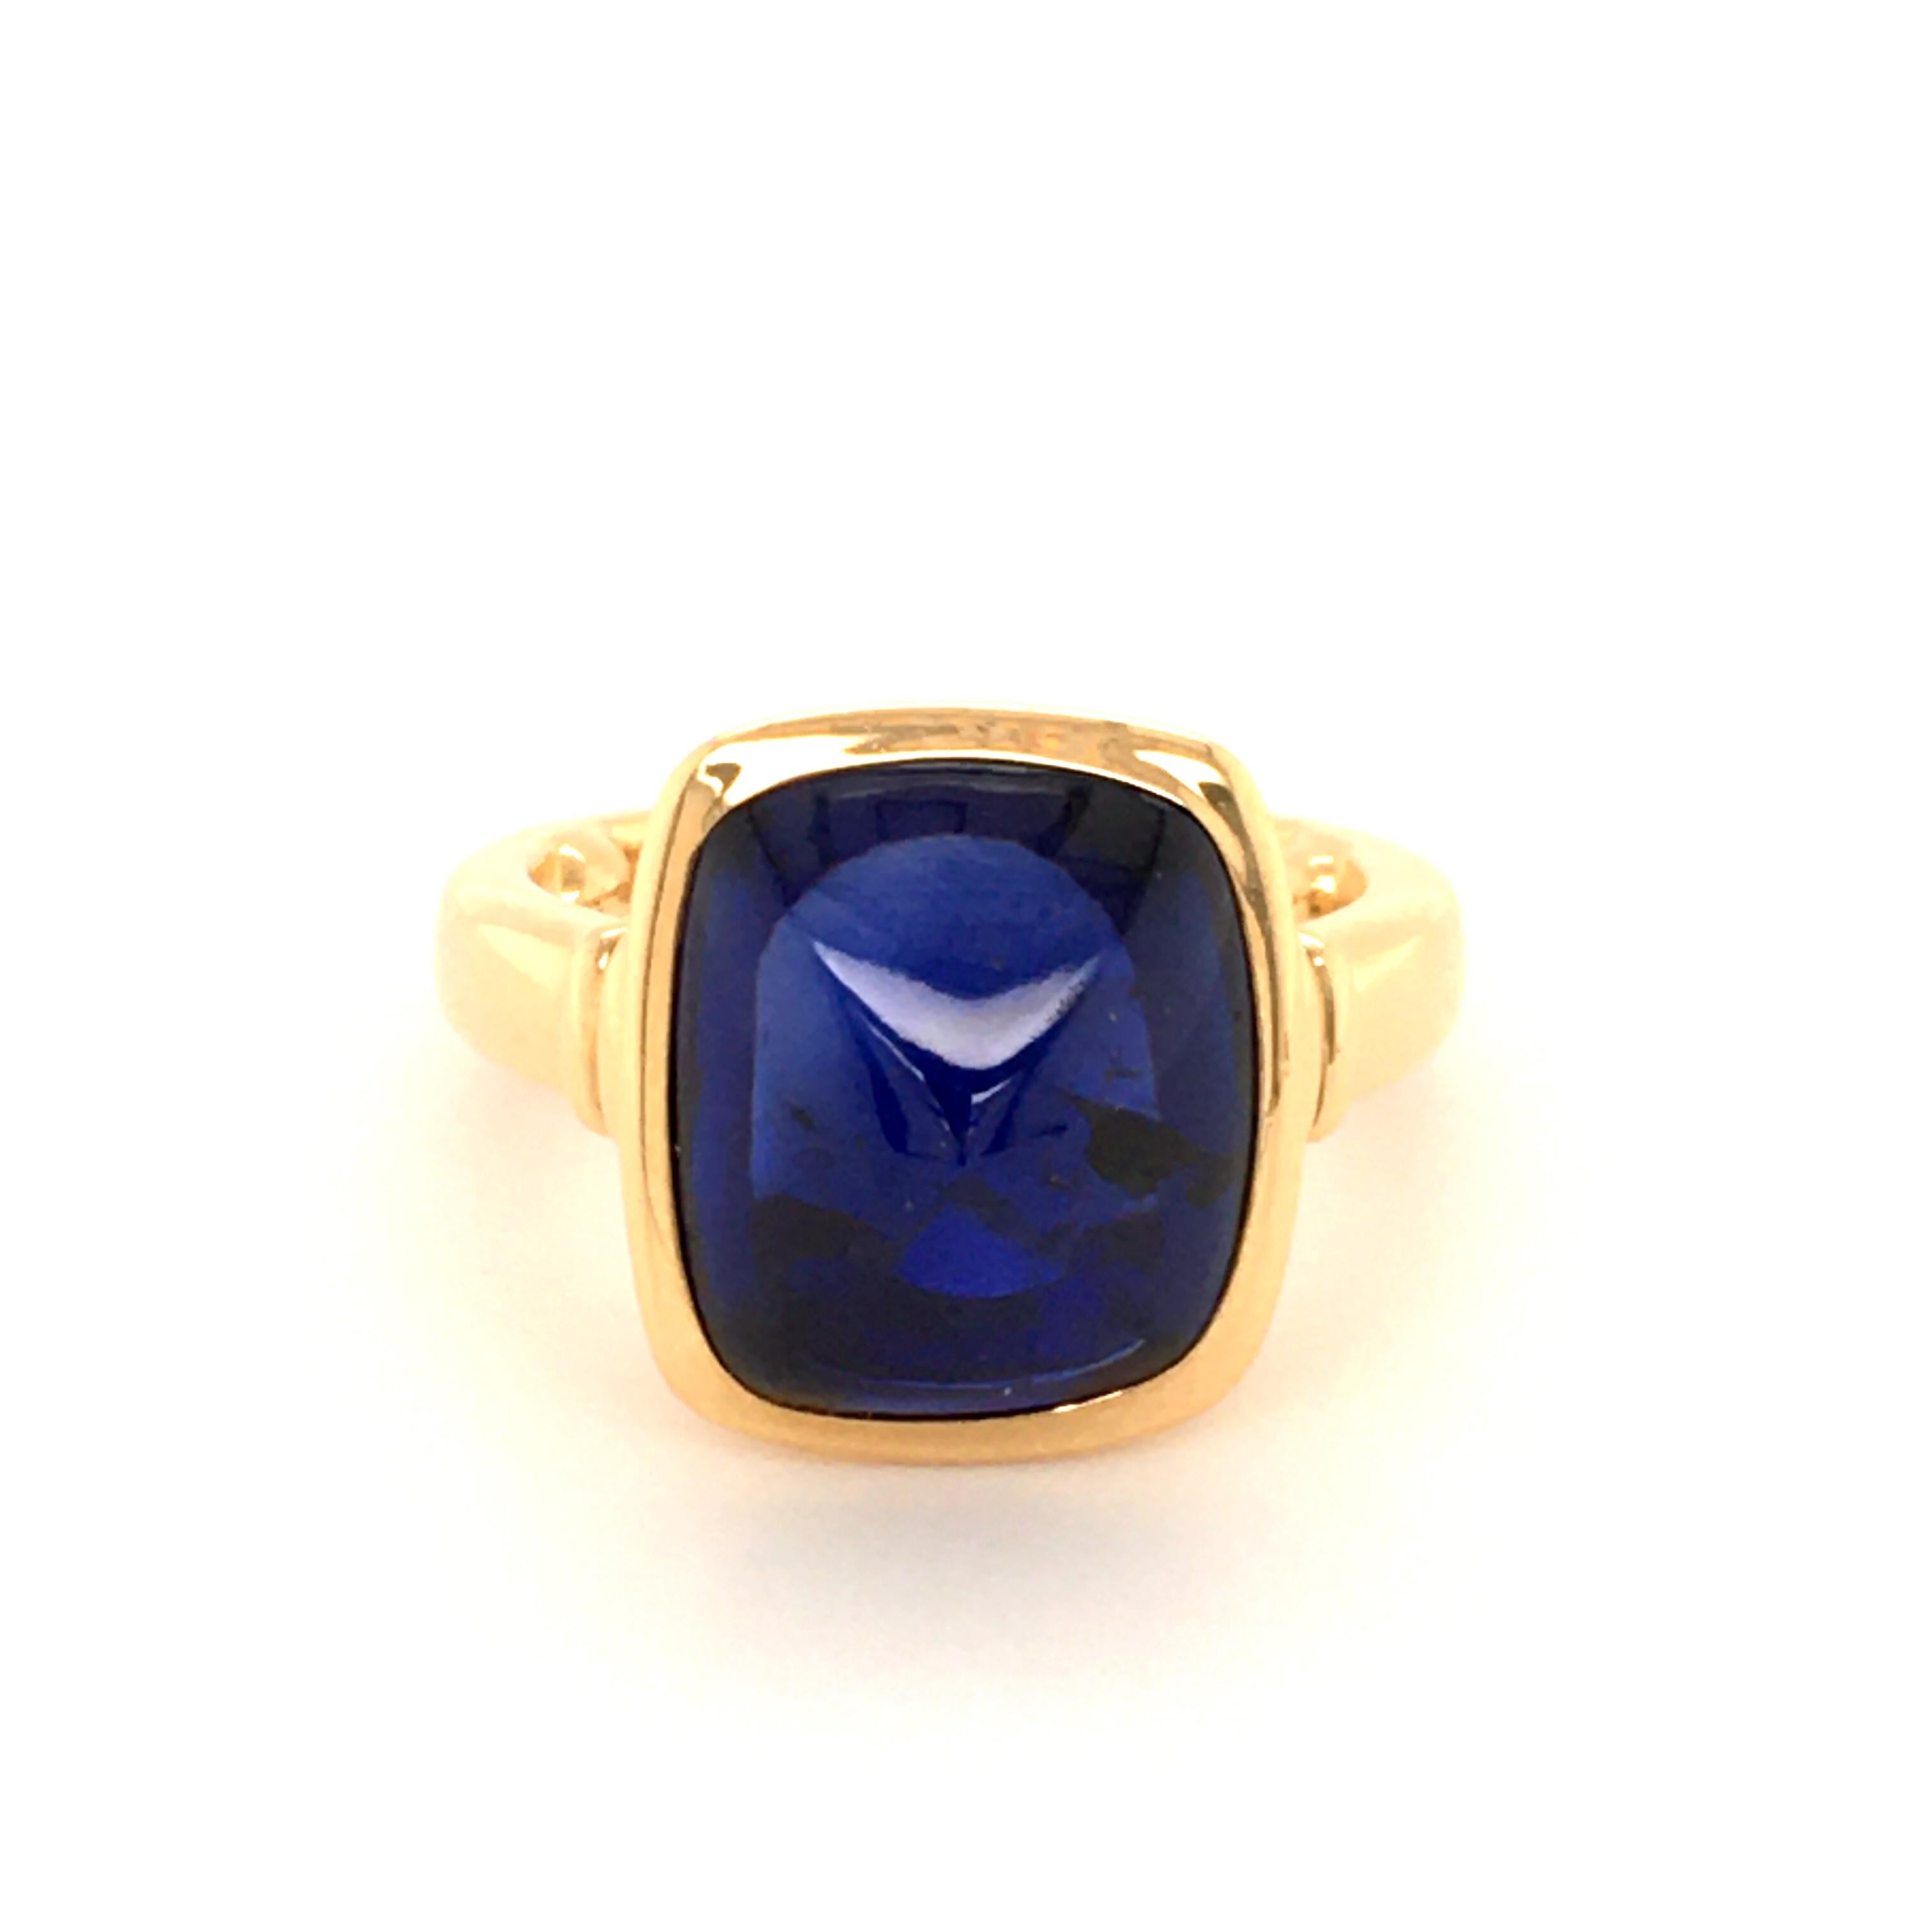 The deep blue Sapphire harmonizes wonderful with the 18 kt Yellow Gold setting.
The spaecial shape is called sugarloaf-cut.
The sapphire is of approximate 9.44 ct in weight.
Inside of the ring you see this little gold inlays - they make sure that